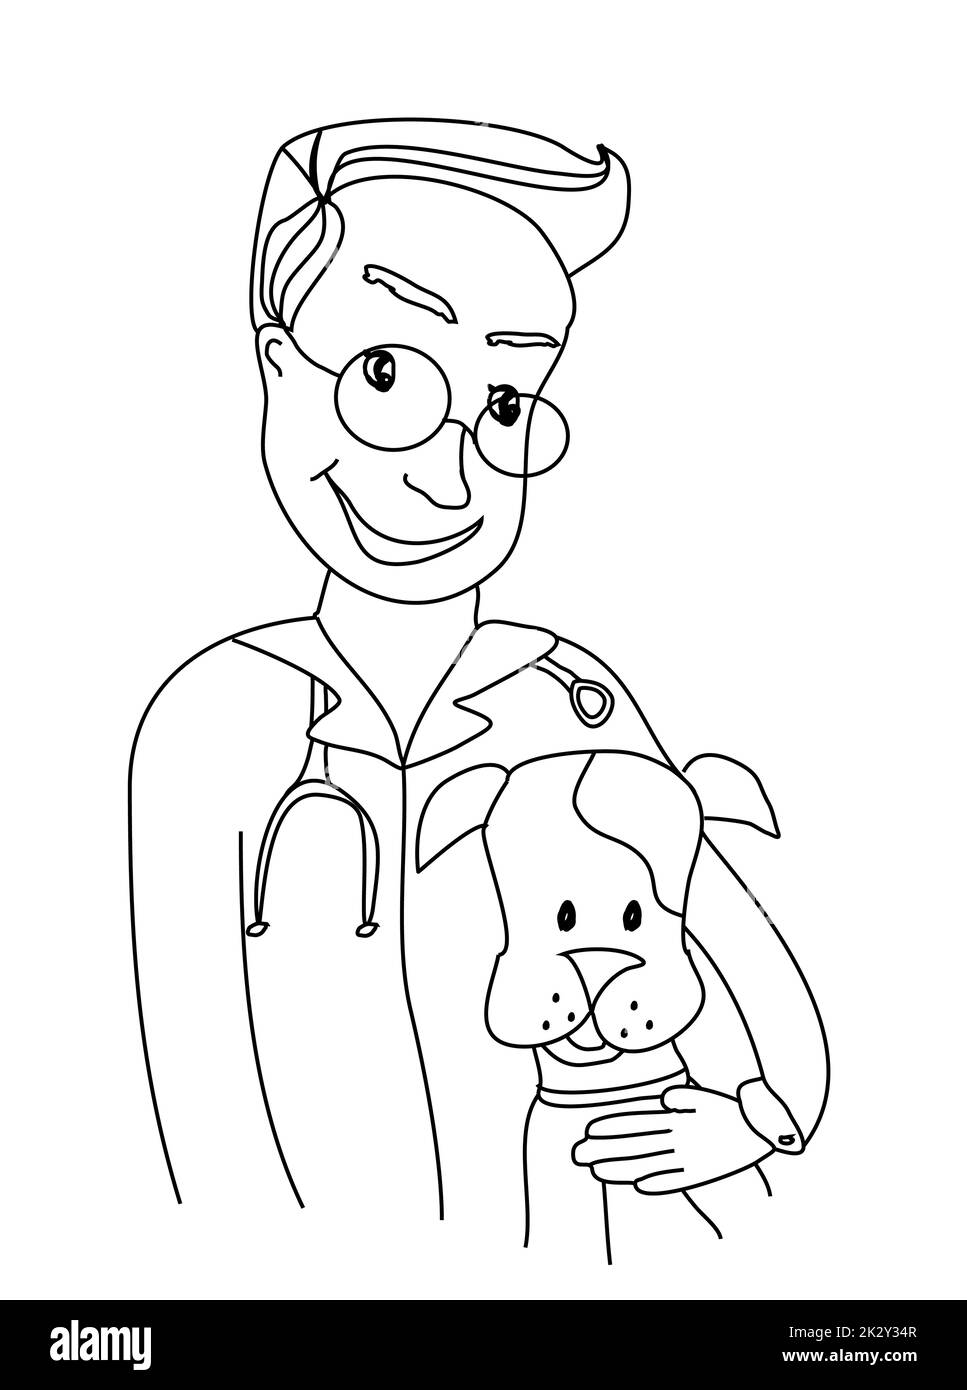 Dog and veterinarian - doodle illustration Stock Photo